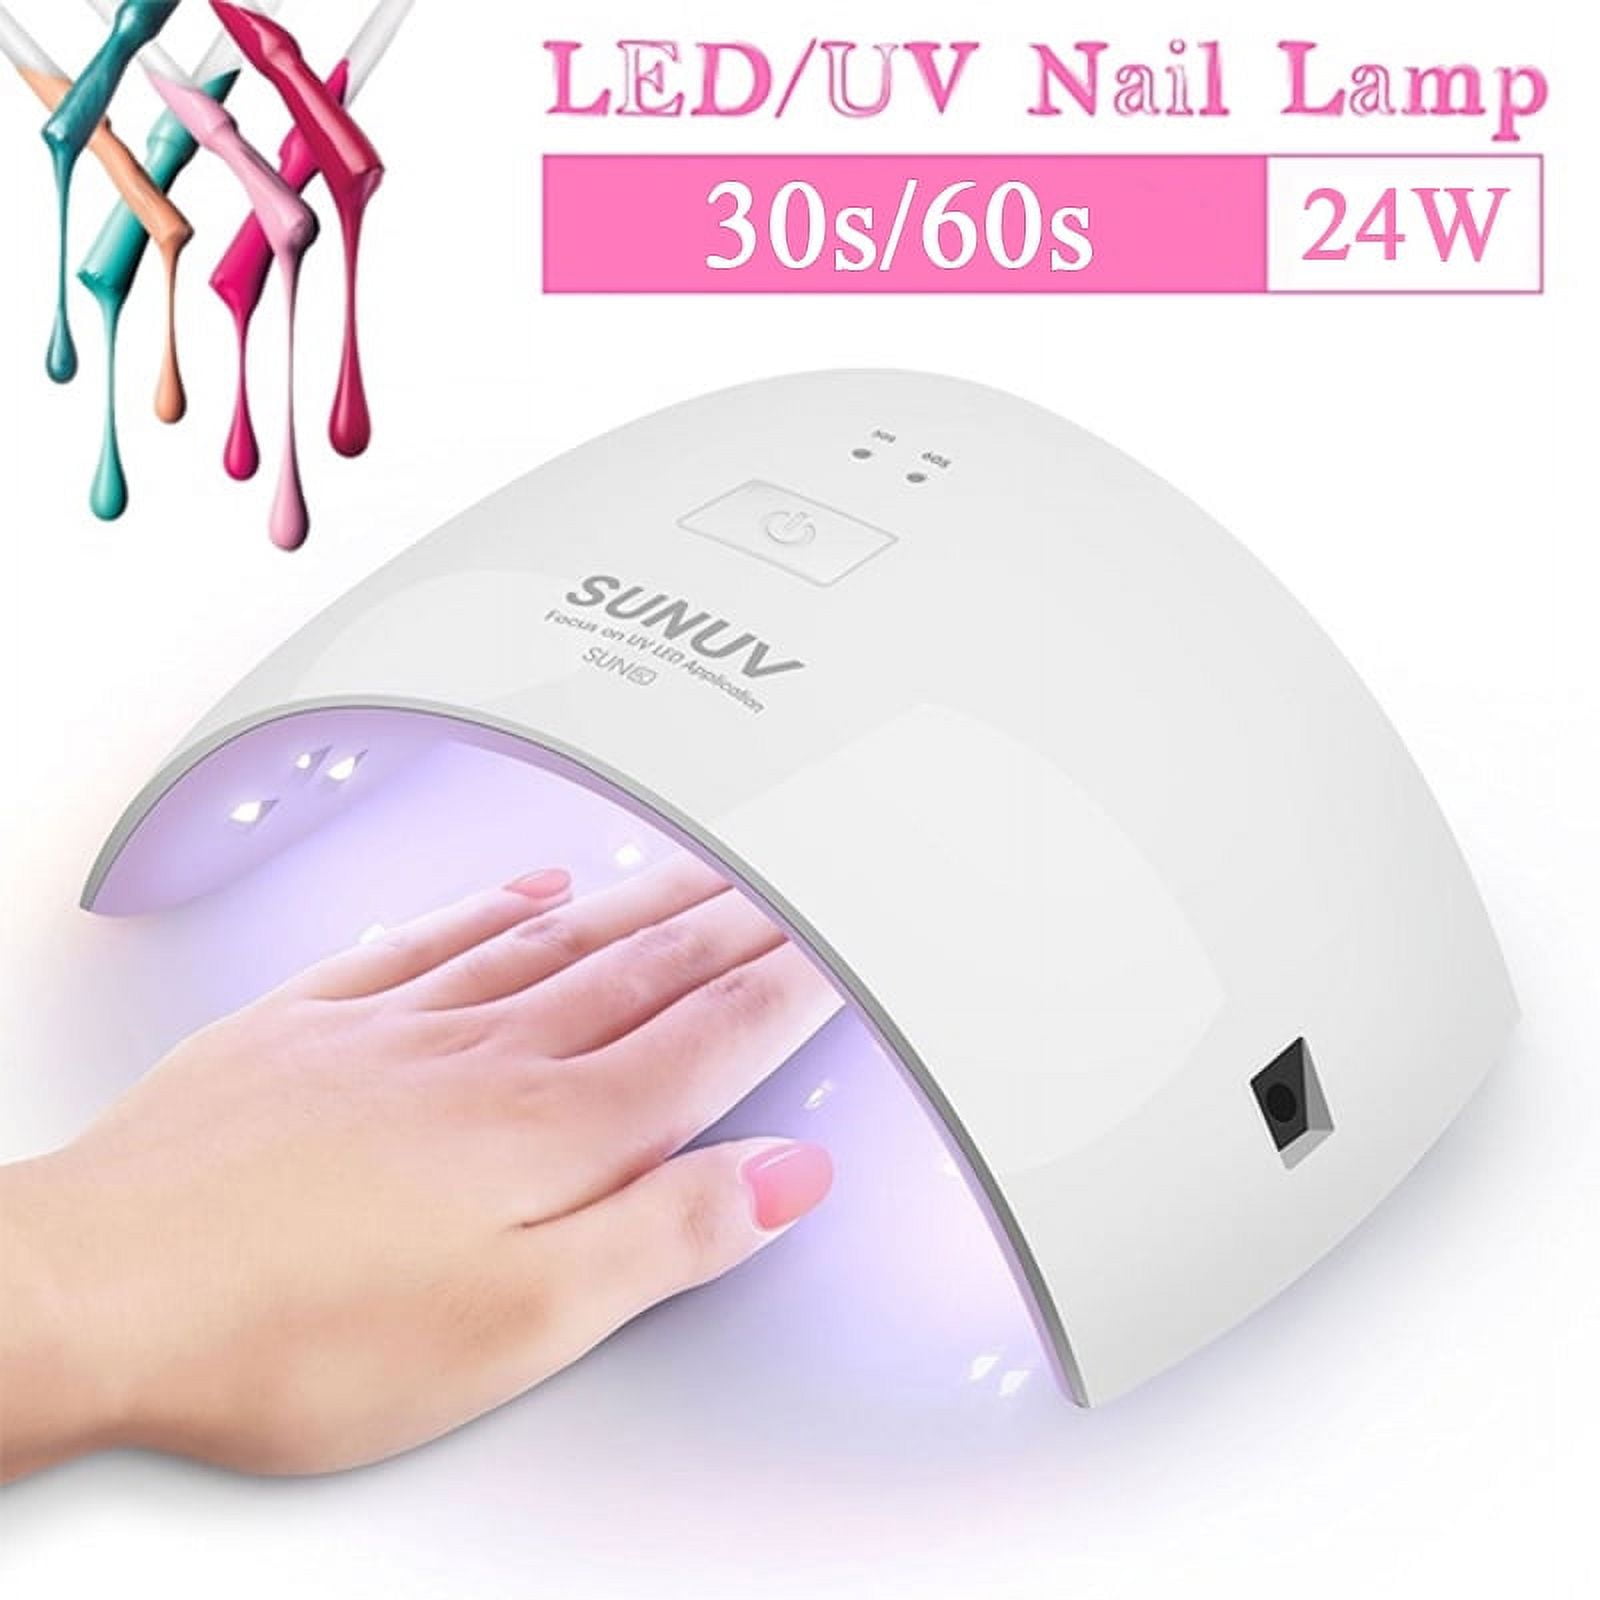 Professional UV LED Nail Lamp, 54W UV Light for Nail Dryer Curing Lamp for  Gel Polish/Poly Gel Kit at Rs 650 | New Items in Ahmedabad | ID: 23253328591